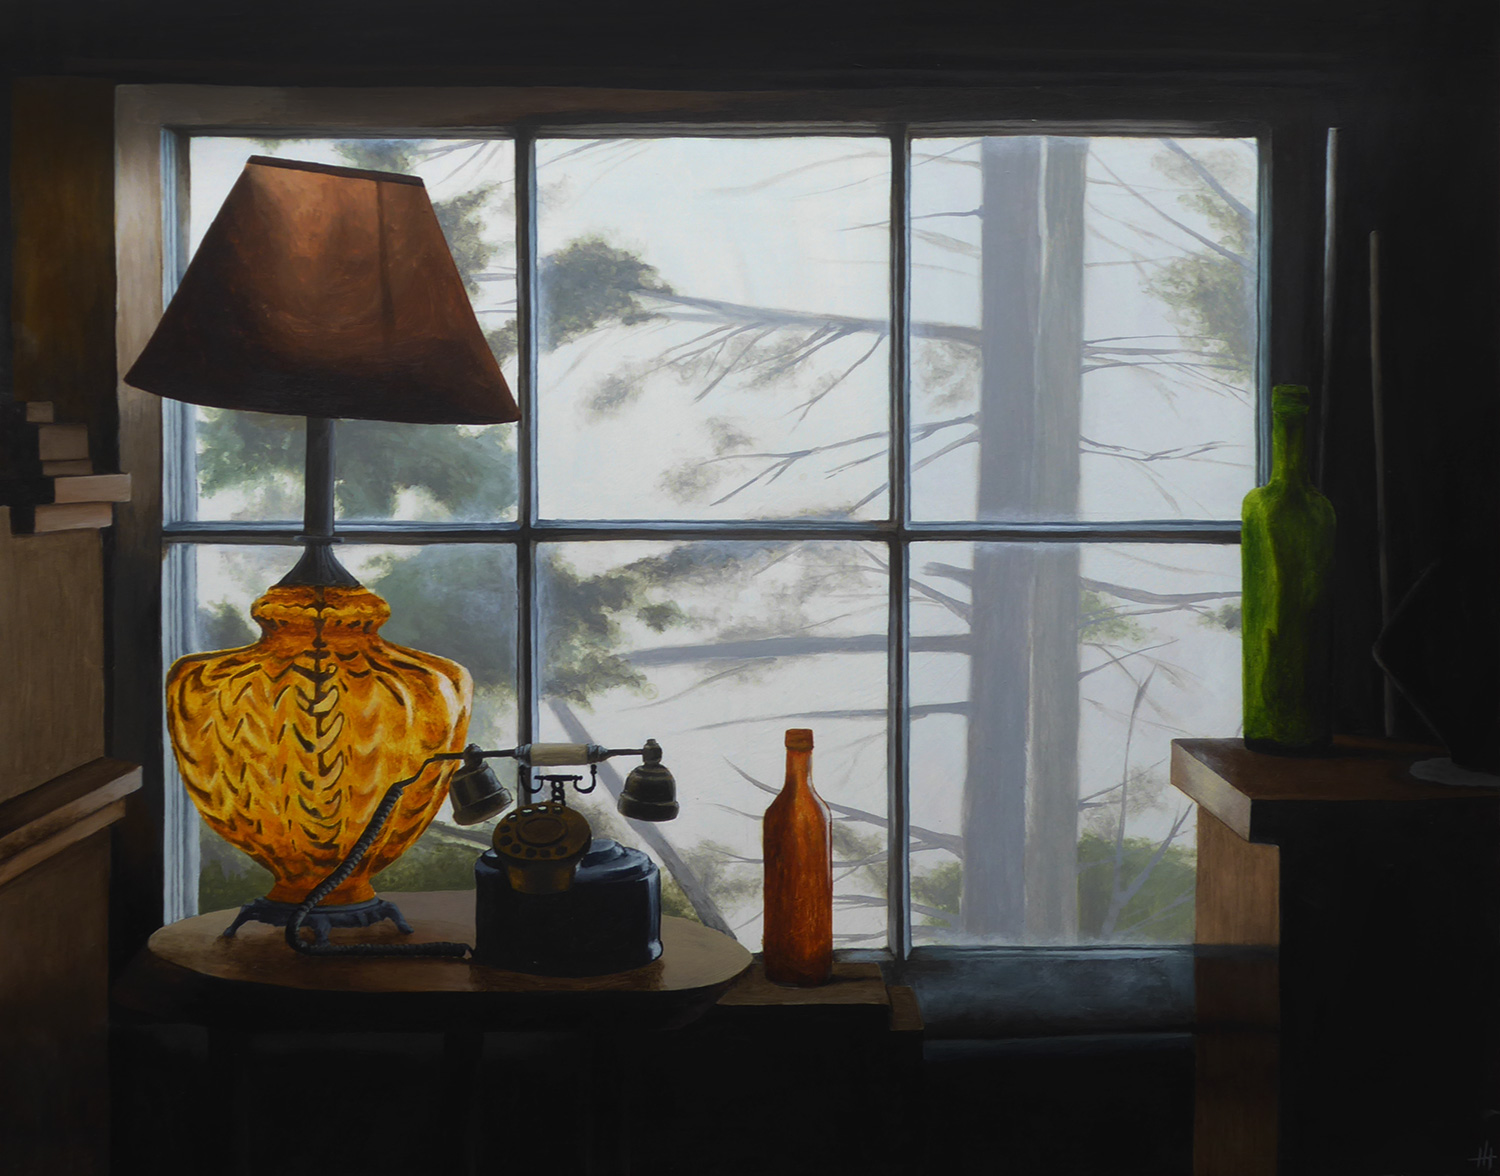 An acrylic painting of an old antique shop window with lamp and bottles